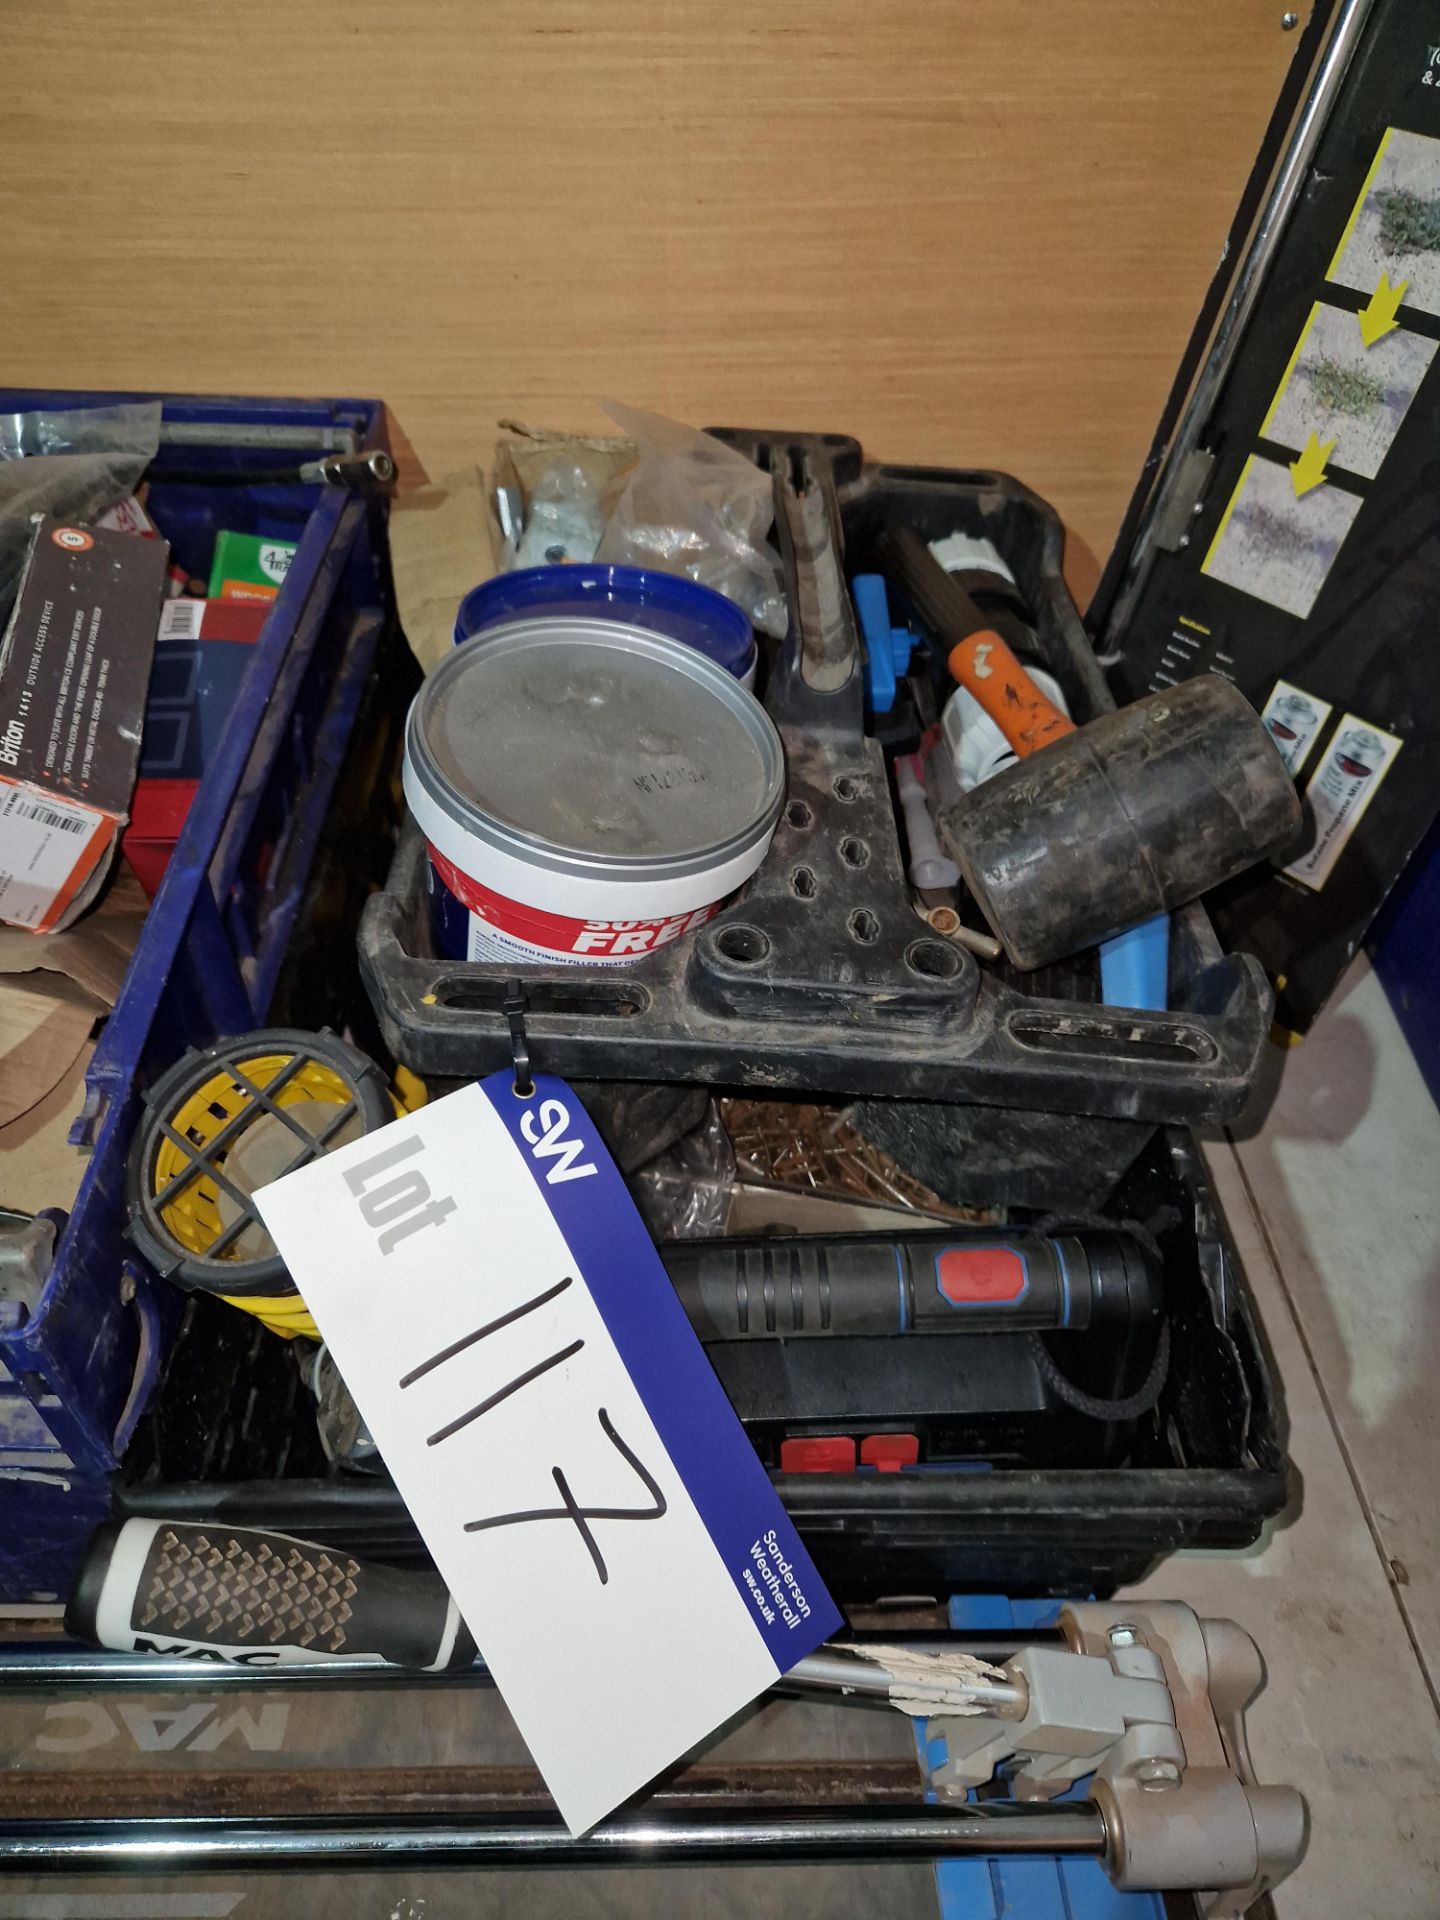 Contents to One Box, including Hand Tools, Site Lights, Fixings, etc Please read the following